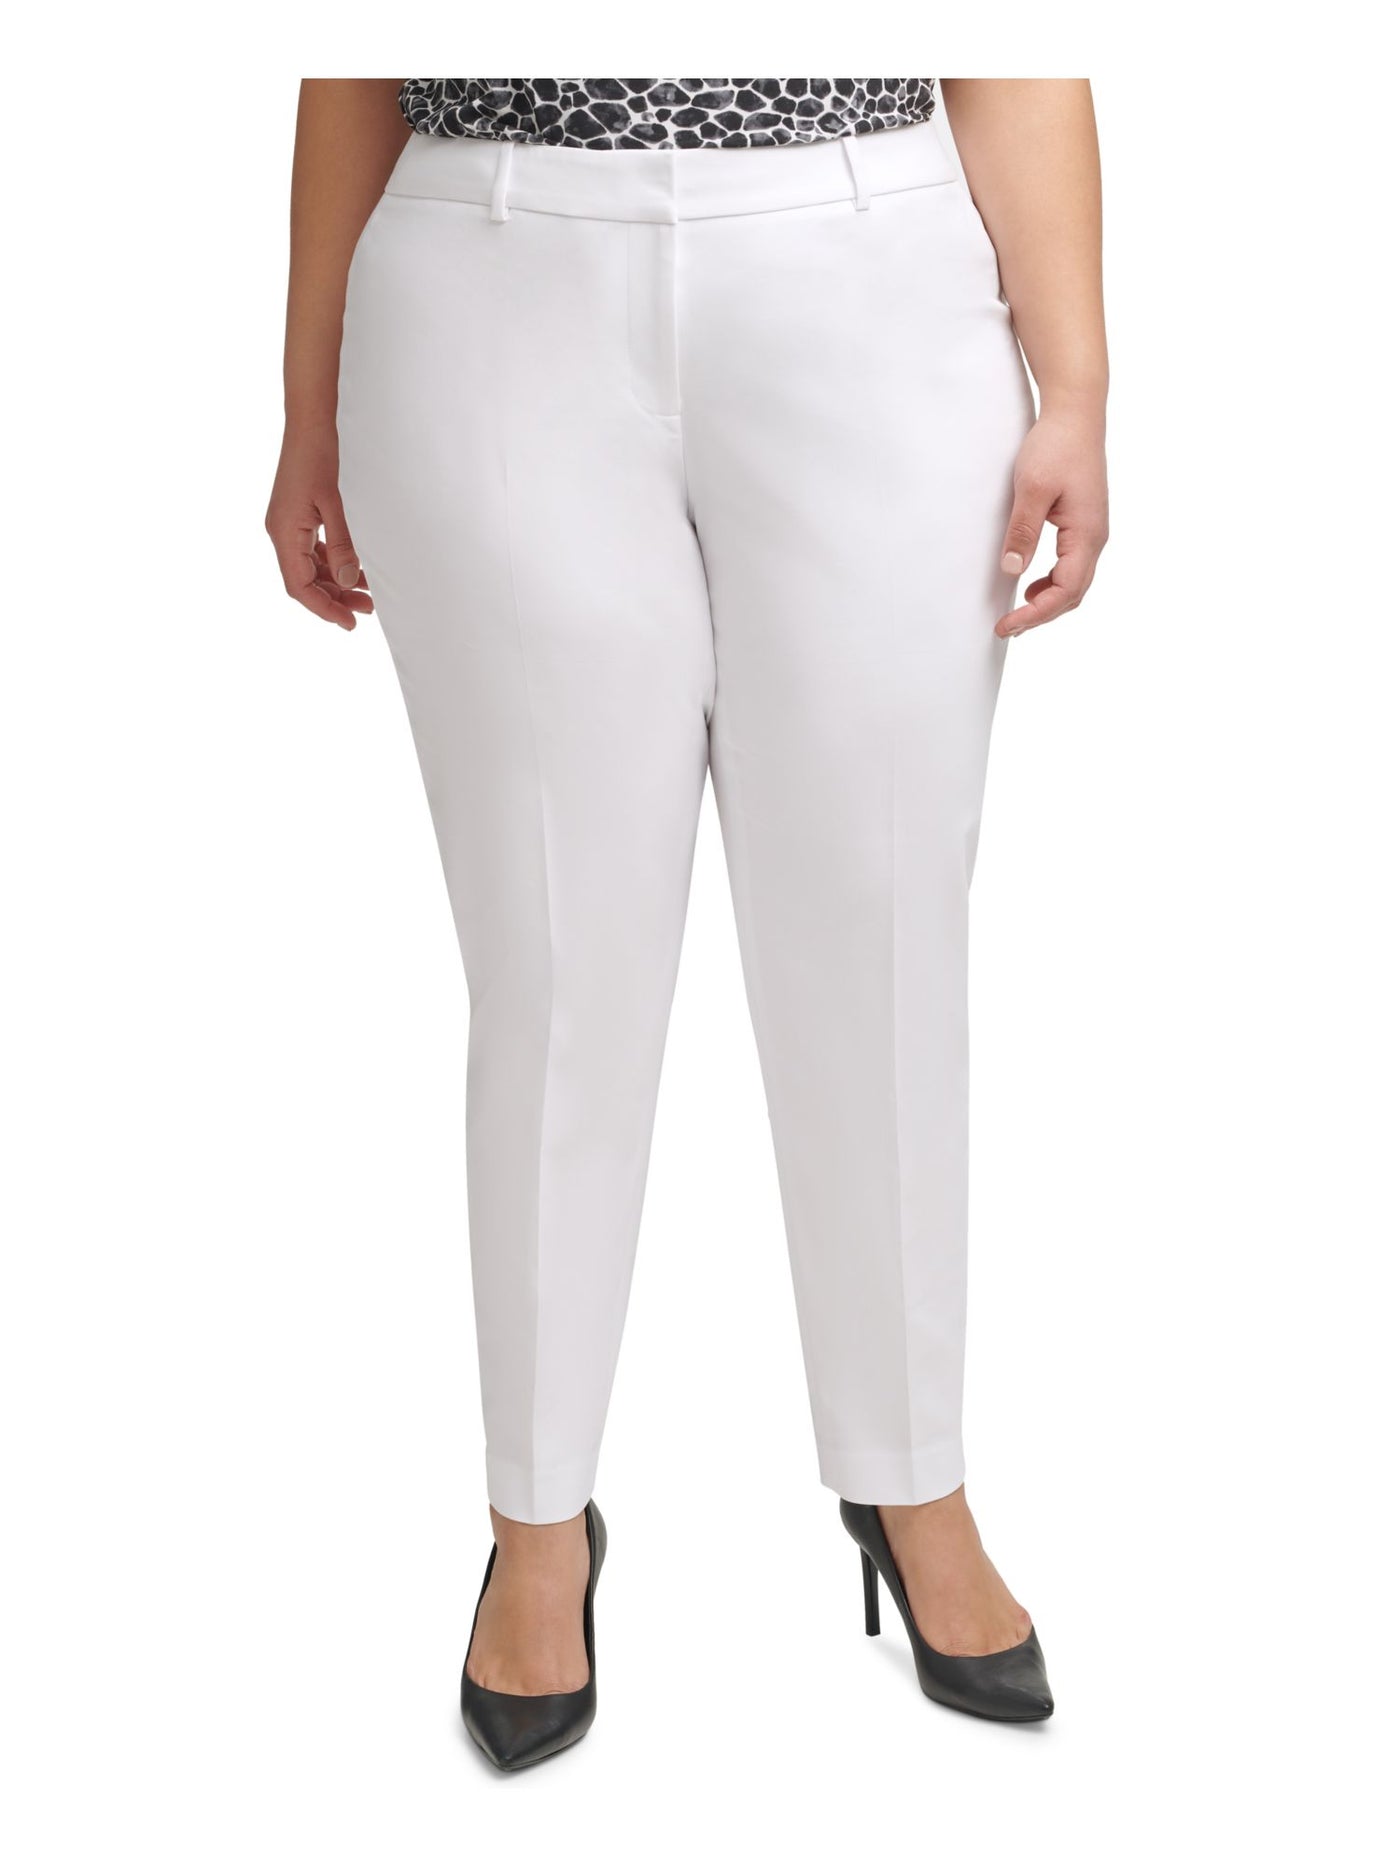 CALVIN KLEIN Womens White Stretch Zippered Slim-fit Mid-rise Wear To Work Straight leg Pants Plus 16W